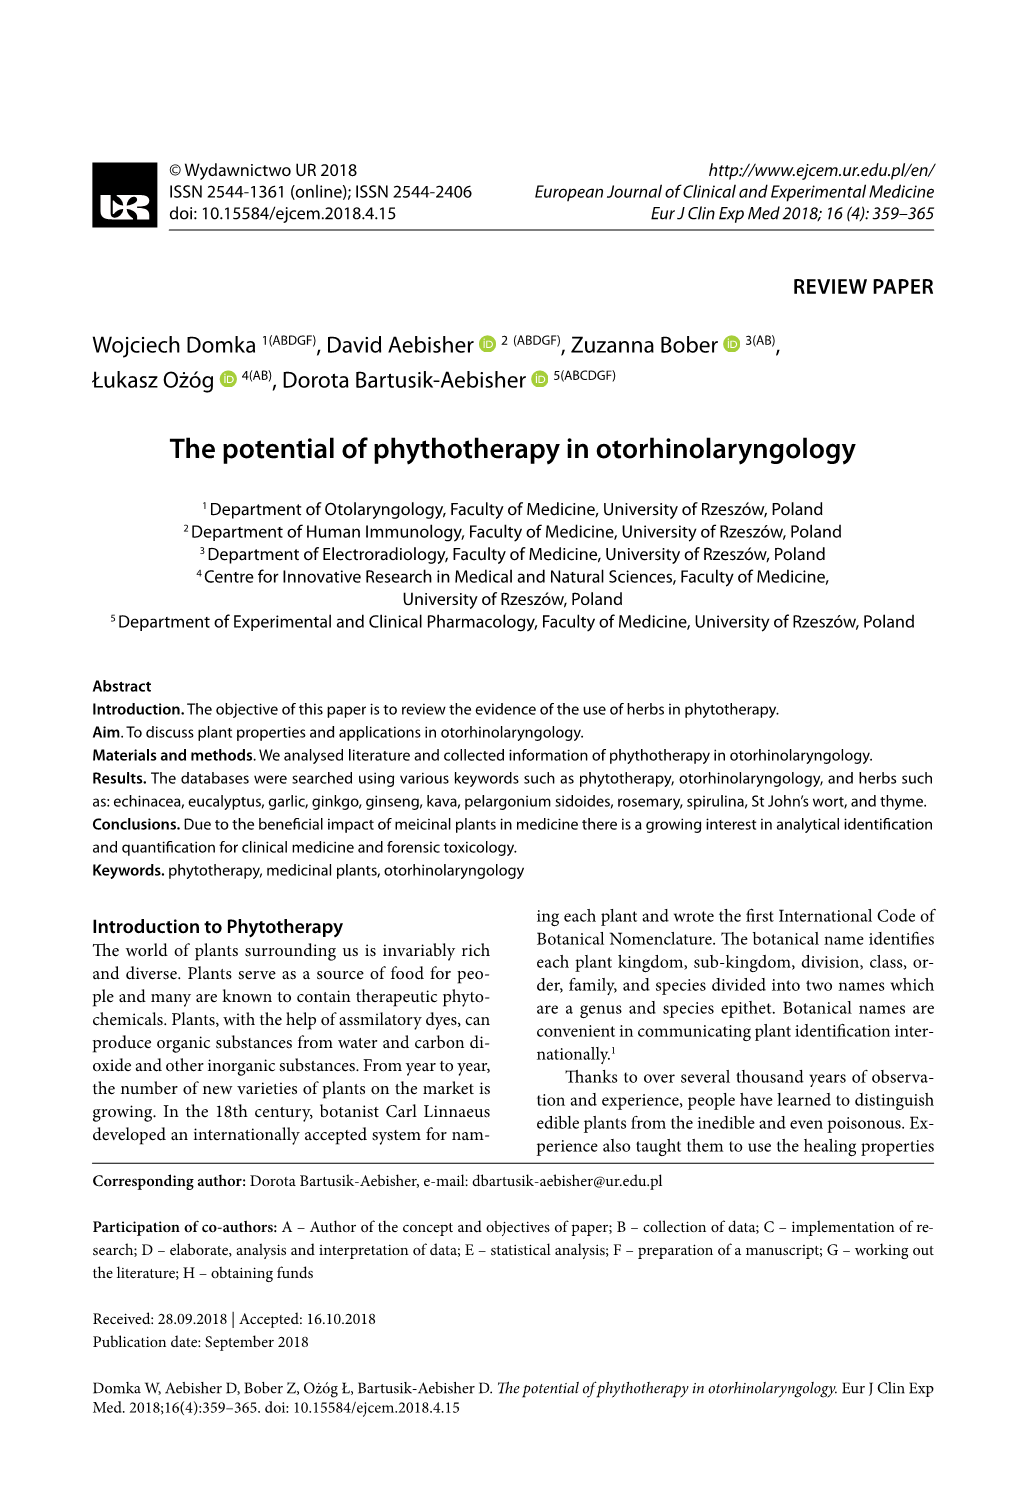 The Potential of Phythotherapy in Otorhinolaryngology 359